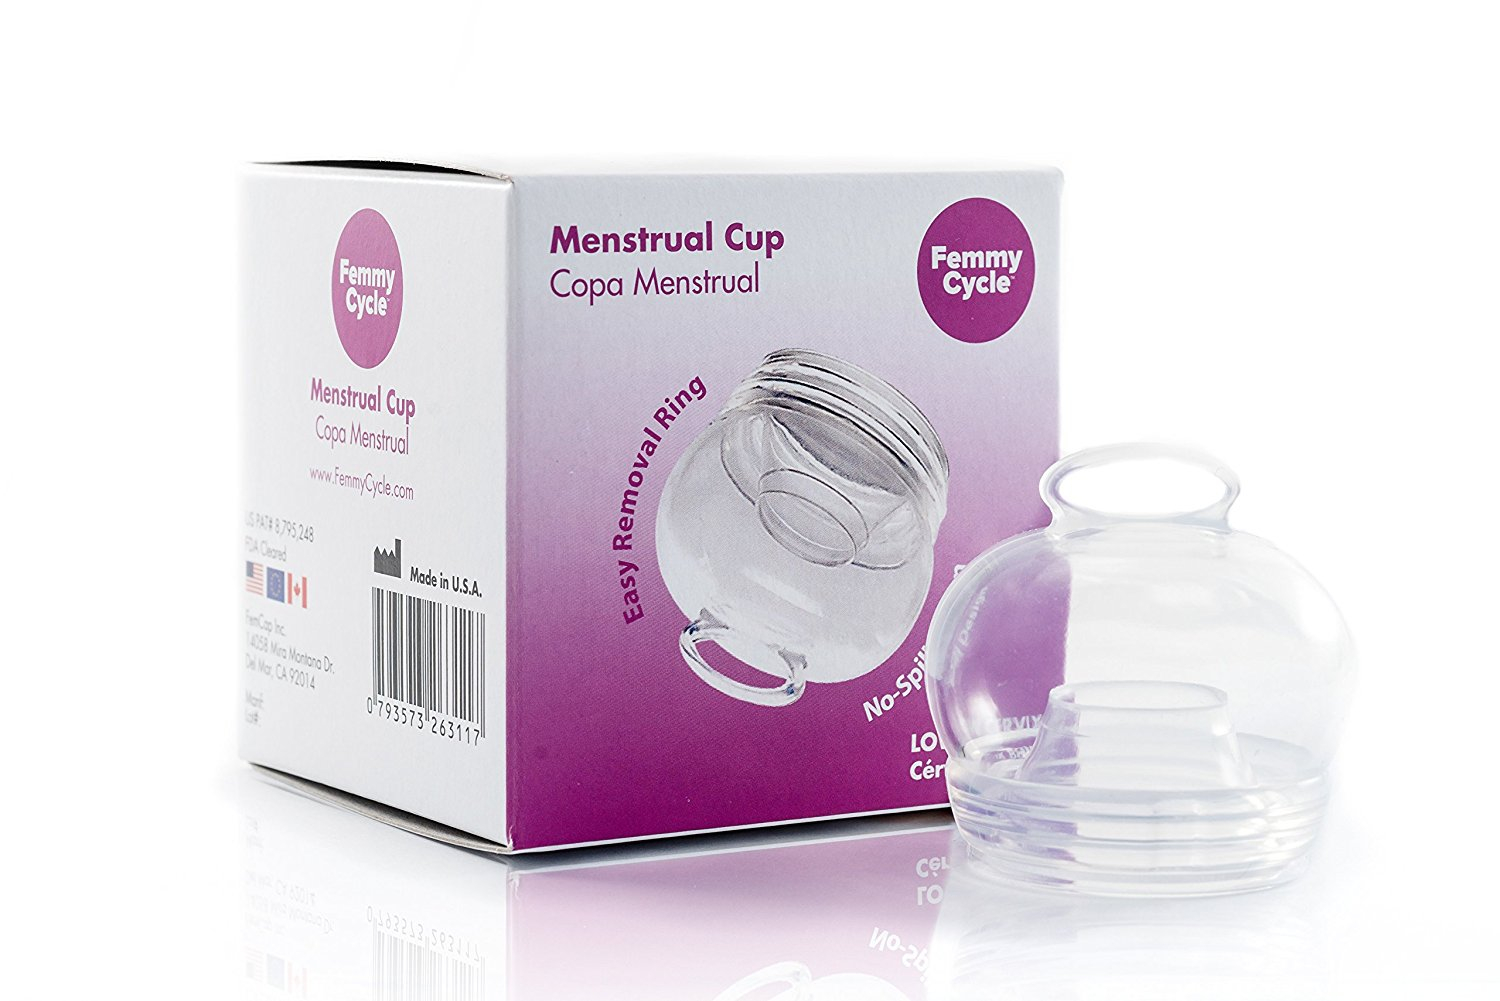 Menstrual Cup Diagram The 5 Best Menstrual Cups For A Low Cervix